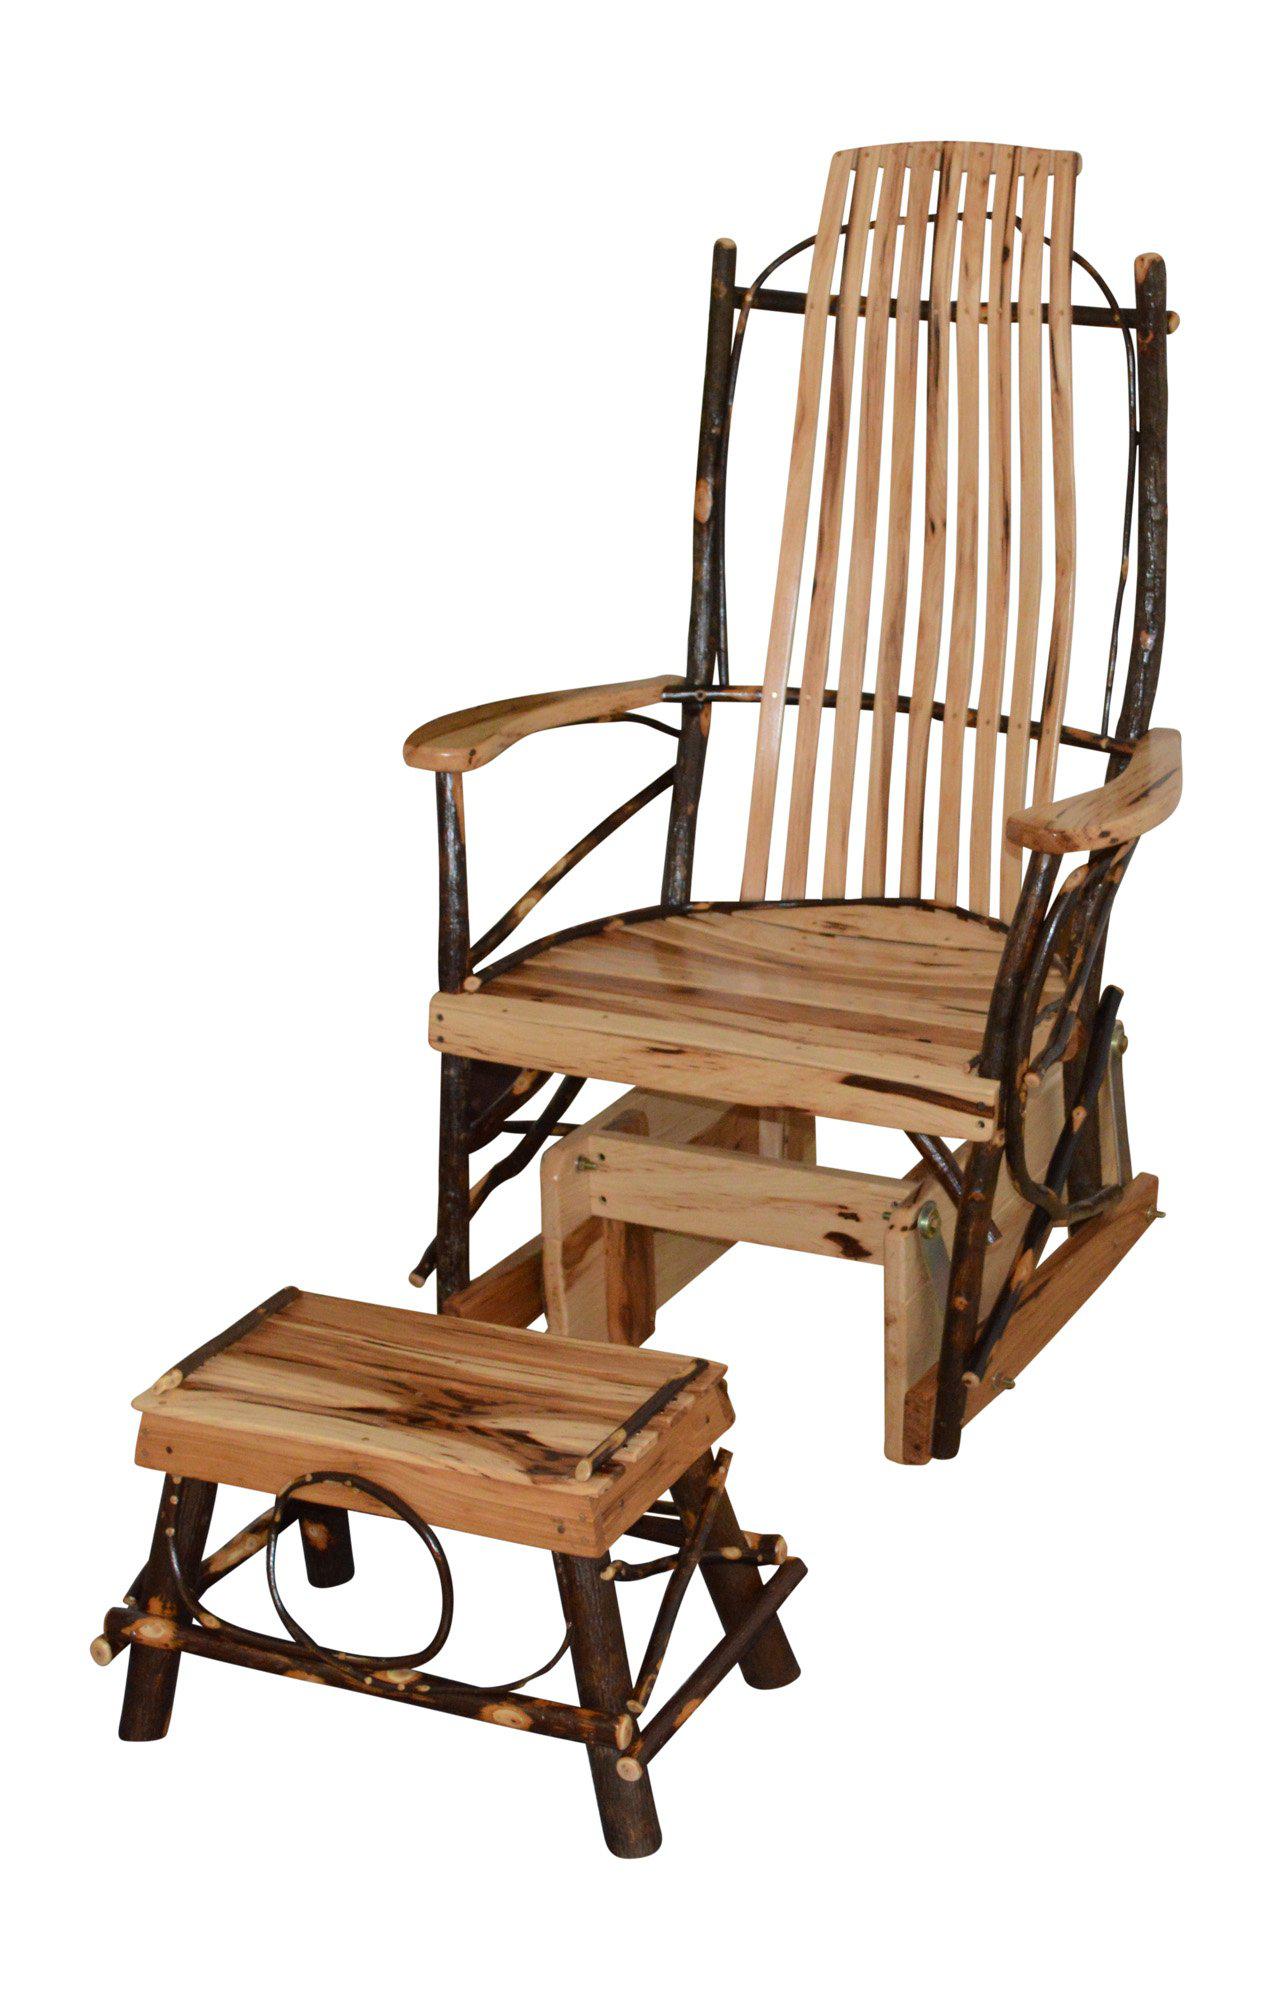 A&L Furniture Co. Amish Bentwood Hickory Glider Rocker with Foot Stool Set - LEAD TIME TO SHIP 4 WEEKS OR LESS